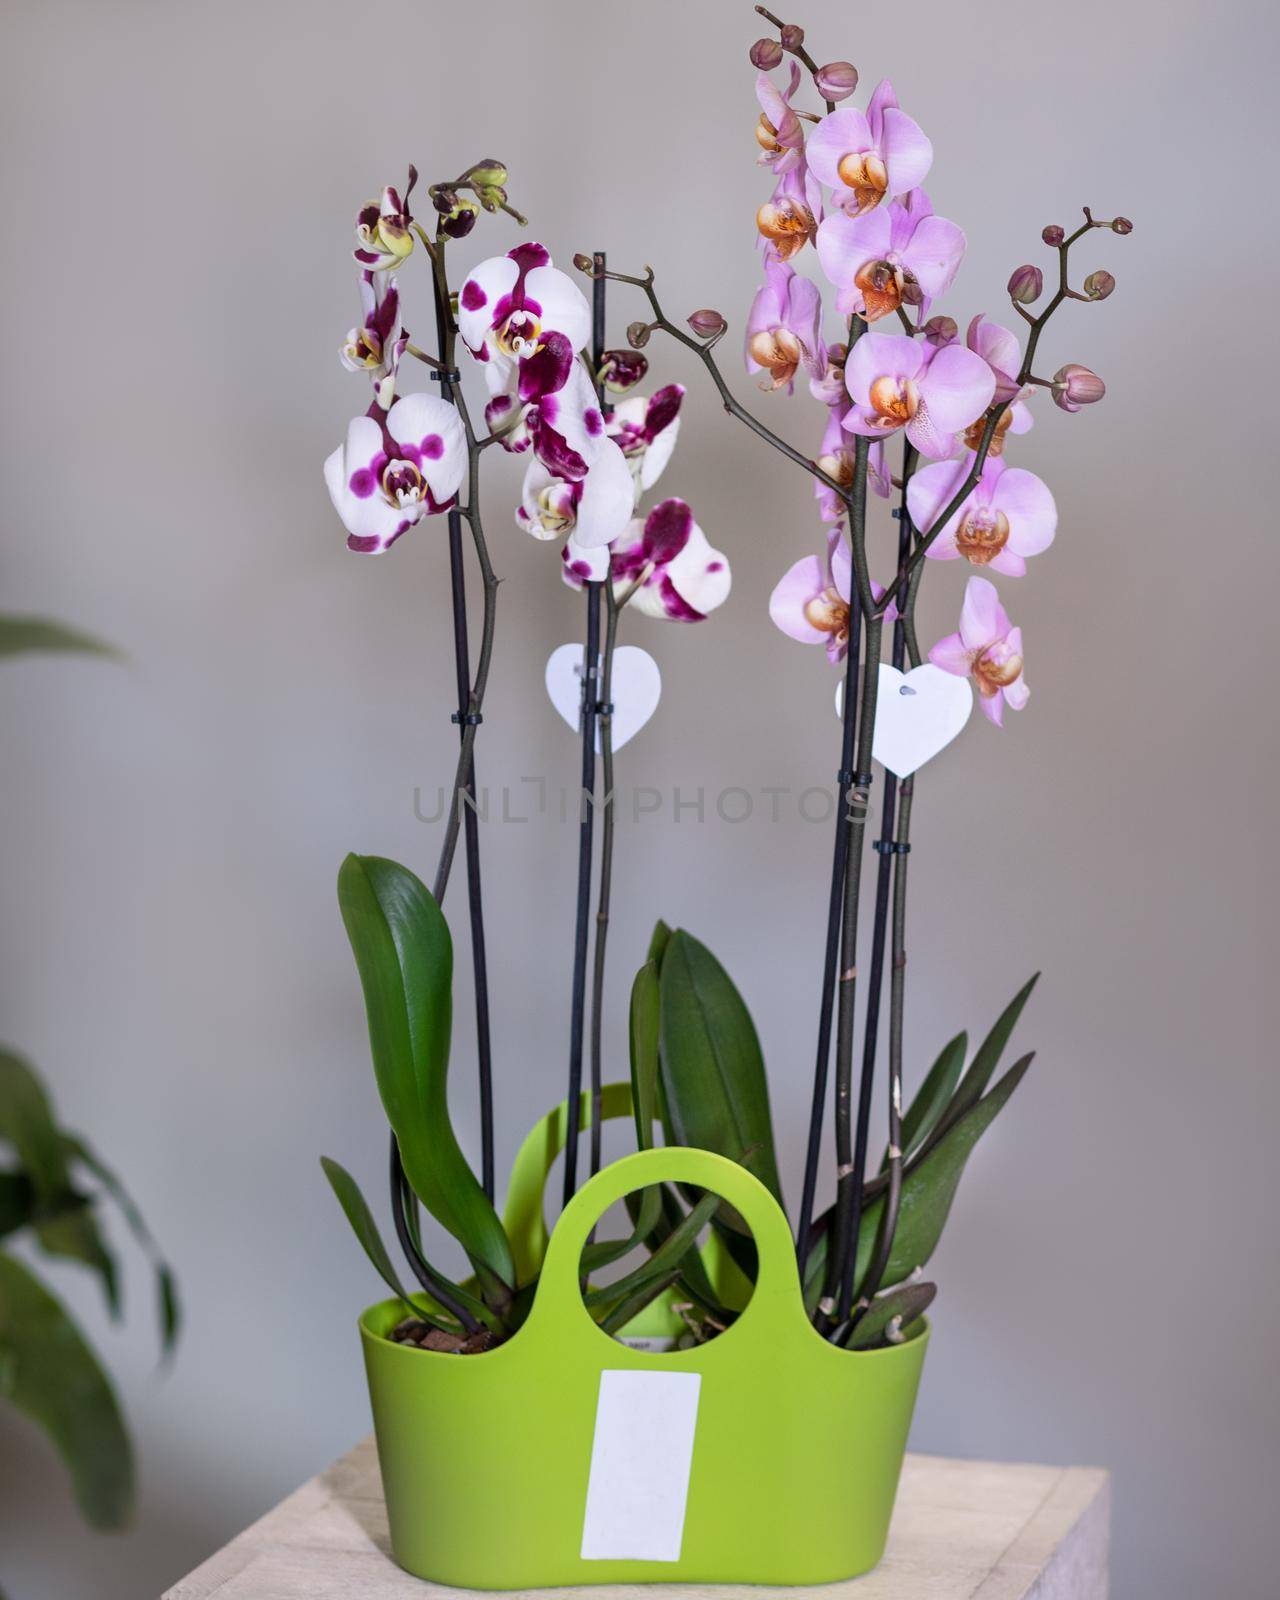 White, pink Phalaenopsis, Moth orchid flowers in the green pot by ferhad